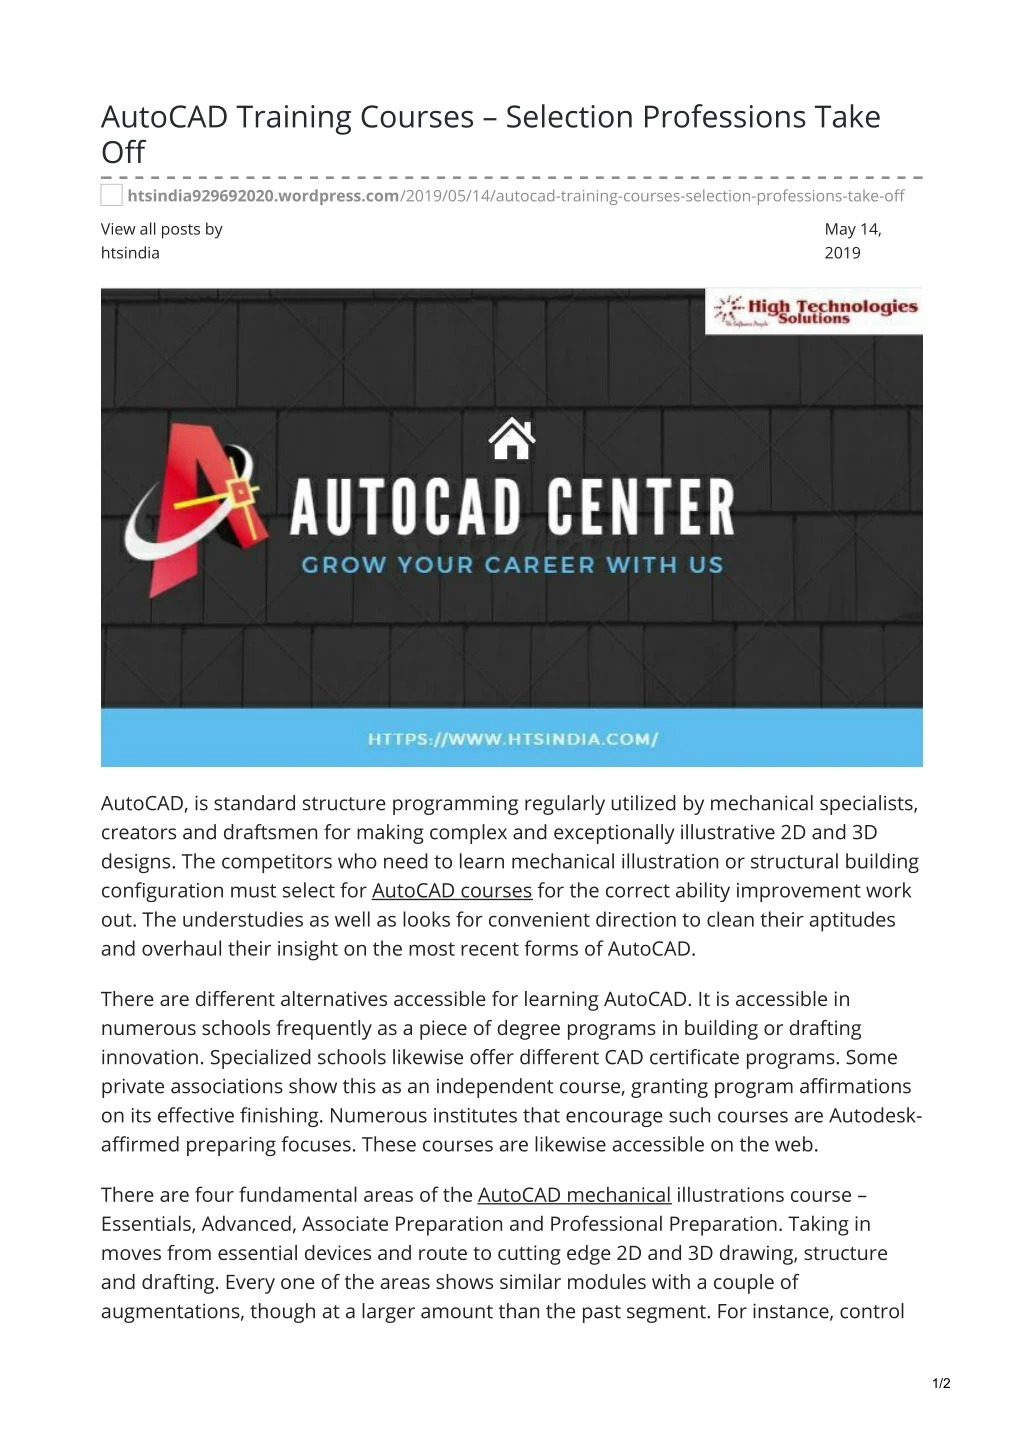 autocad training courses selection professions